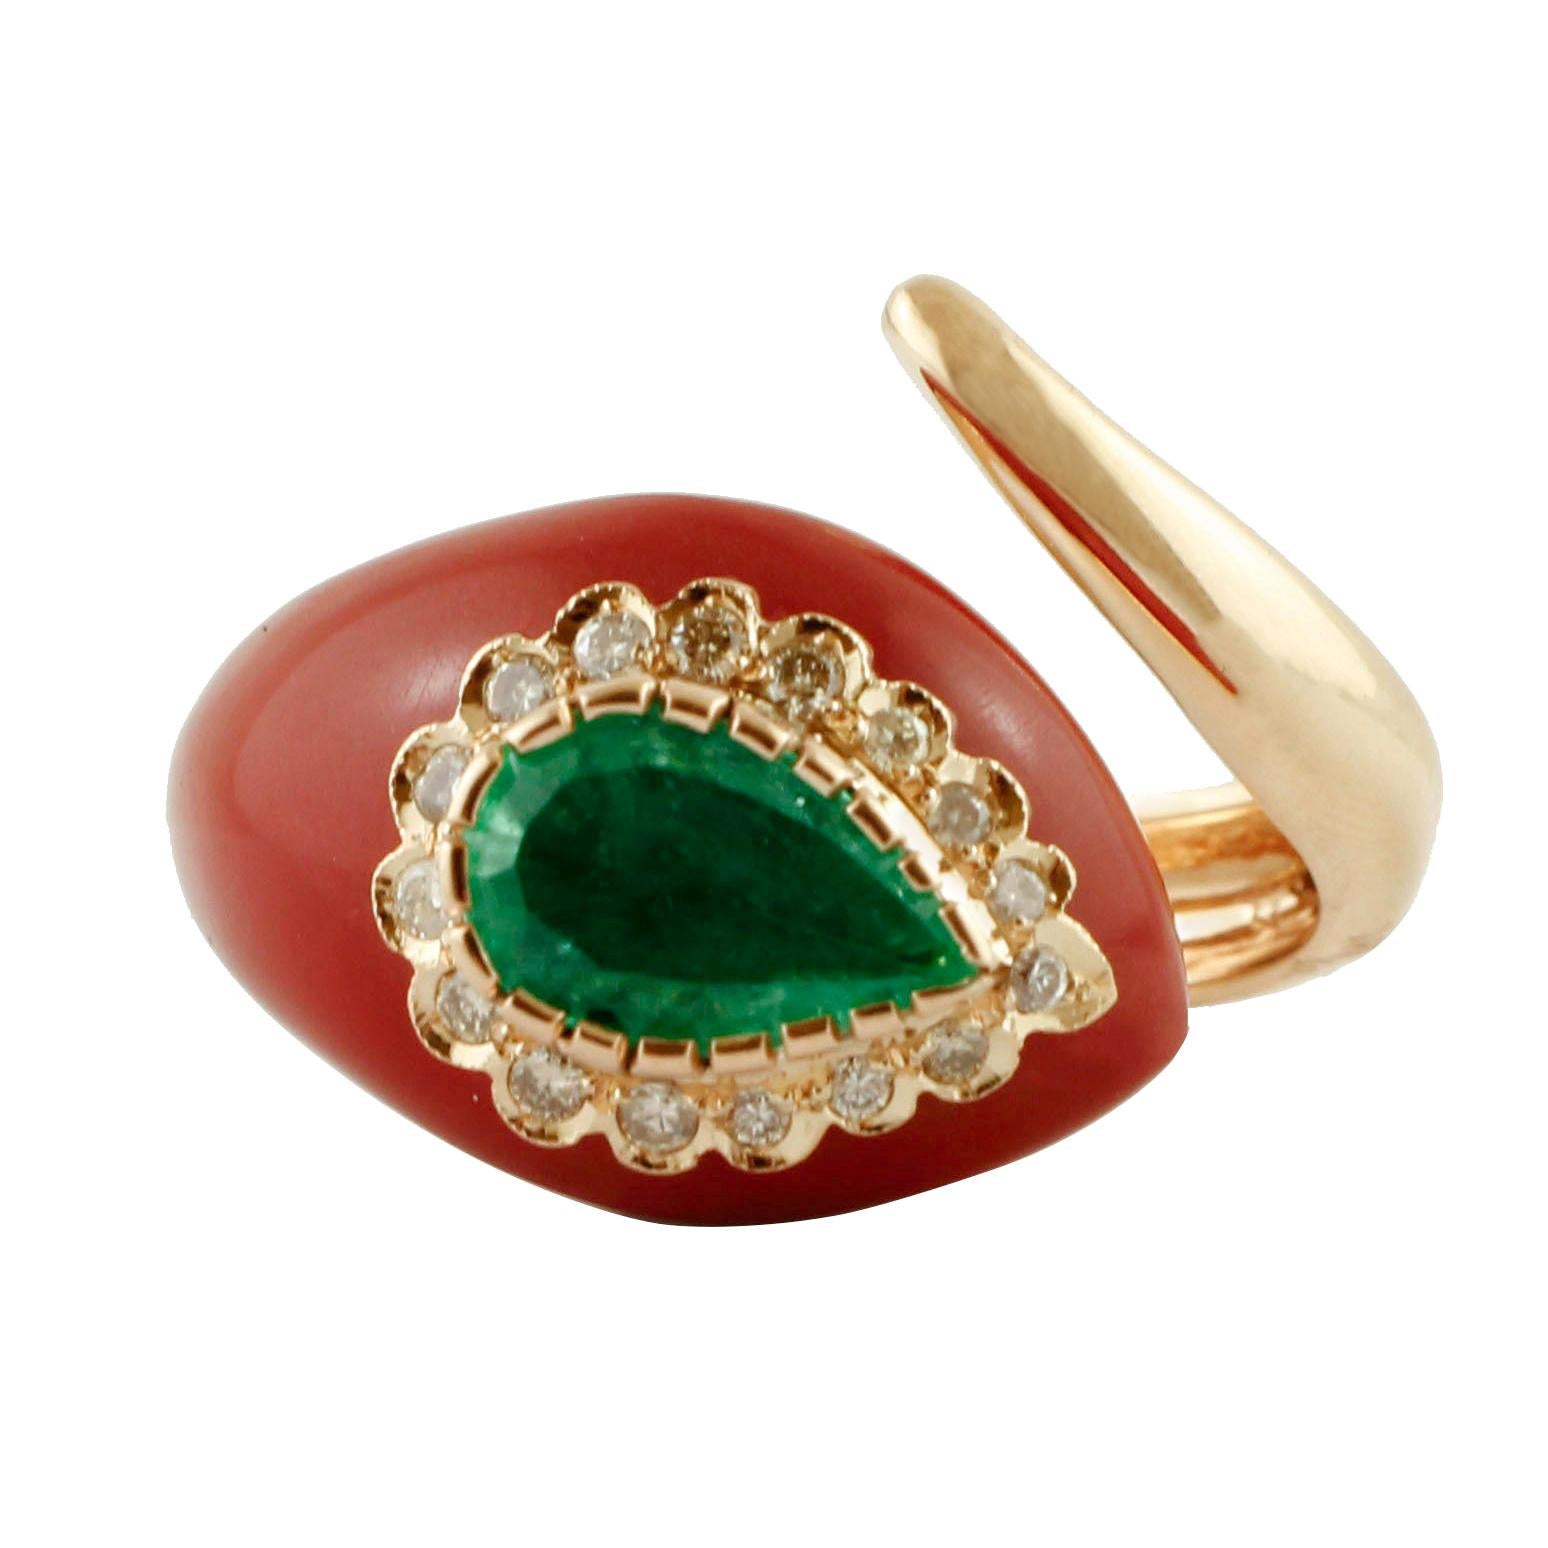 Diamonds, Emerald, Red Coral, Rose Gold, Snake Shape Fashion Ring